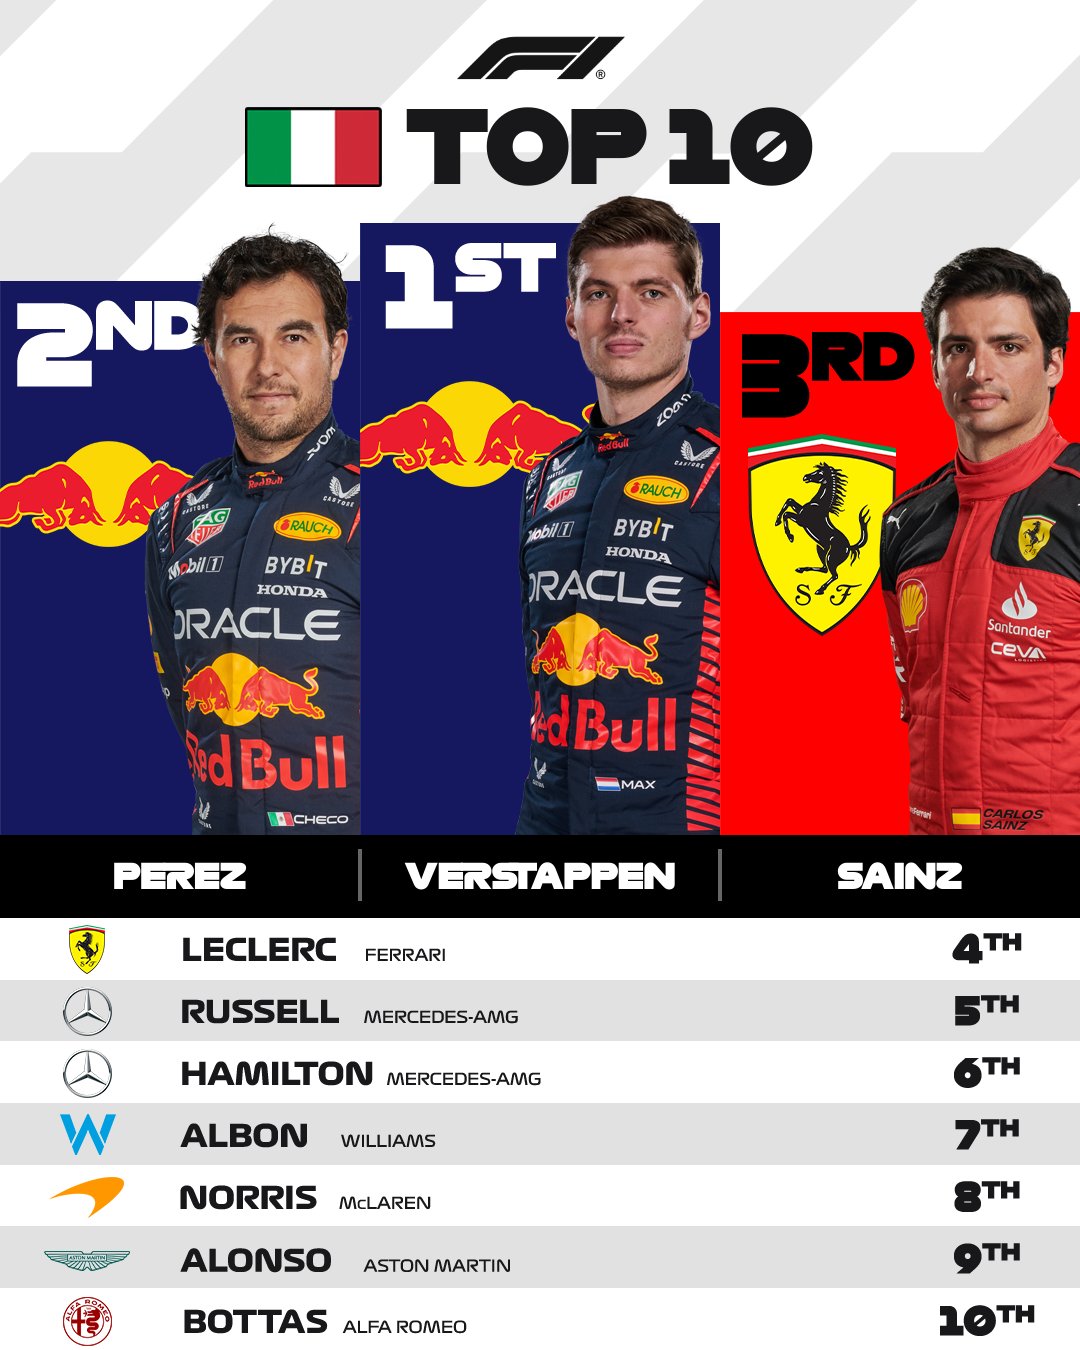 A graphic showing the top 10 drivers at the 2023 Italian Grand Prix. From first to 10th, we have: Verstappen, Perez, Sainz, Leclerc, Russell, Hamilton, Albon, Norris, Alonso and Bottas.